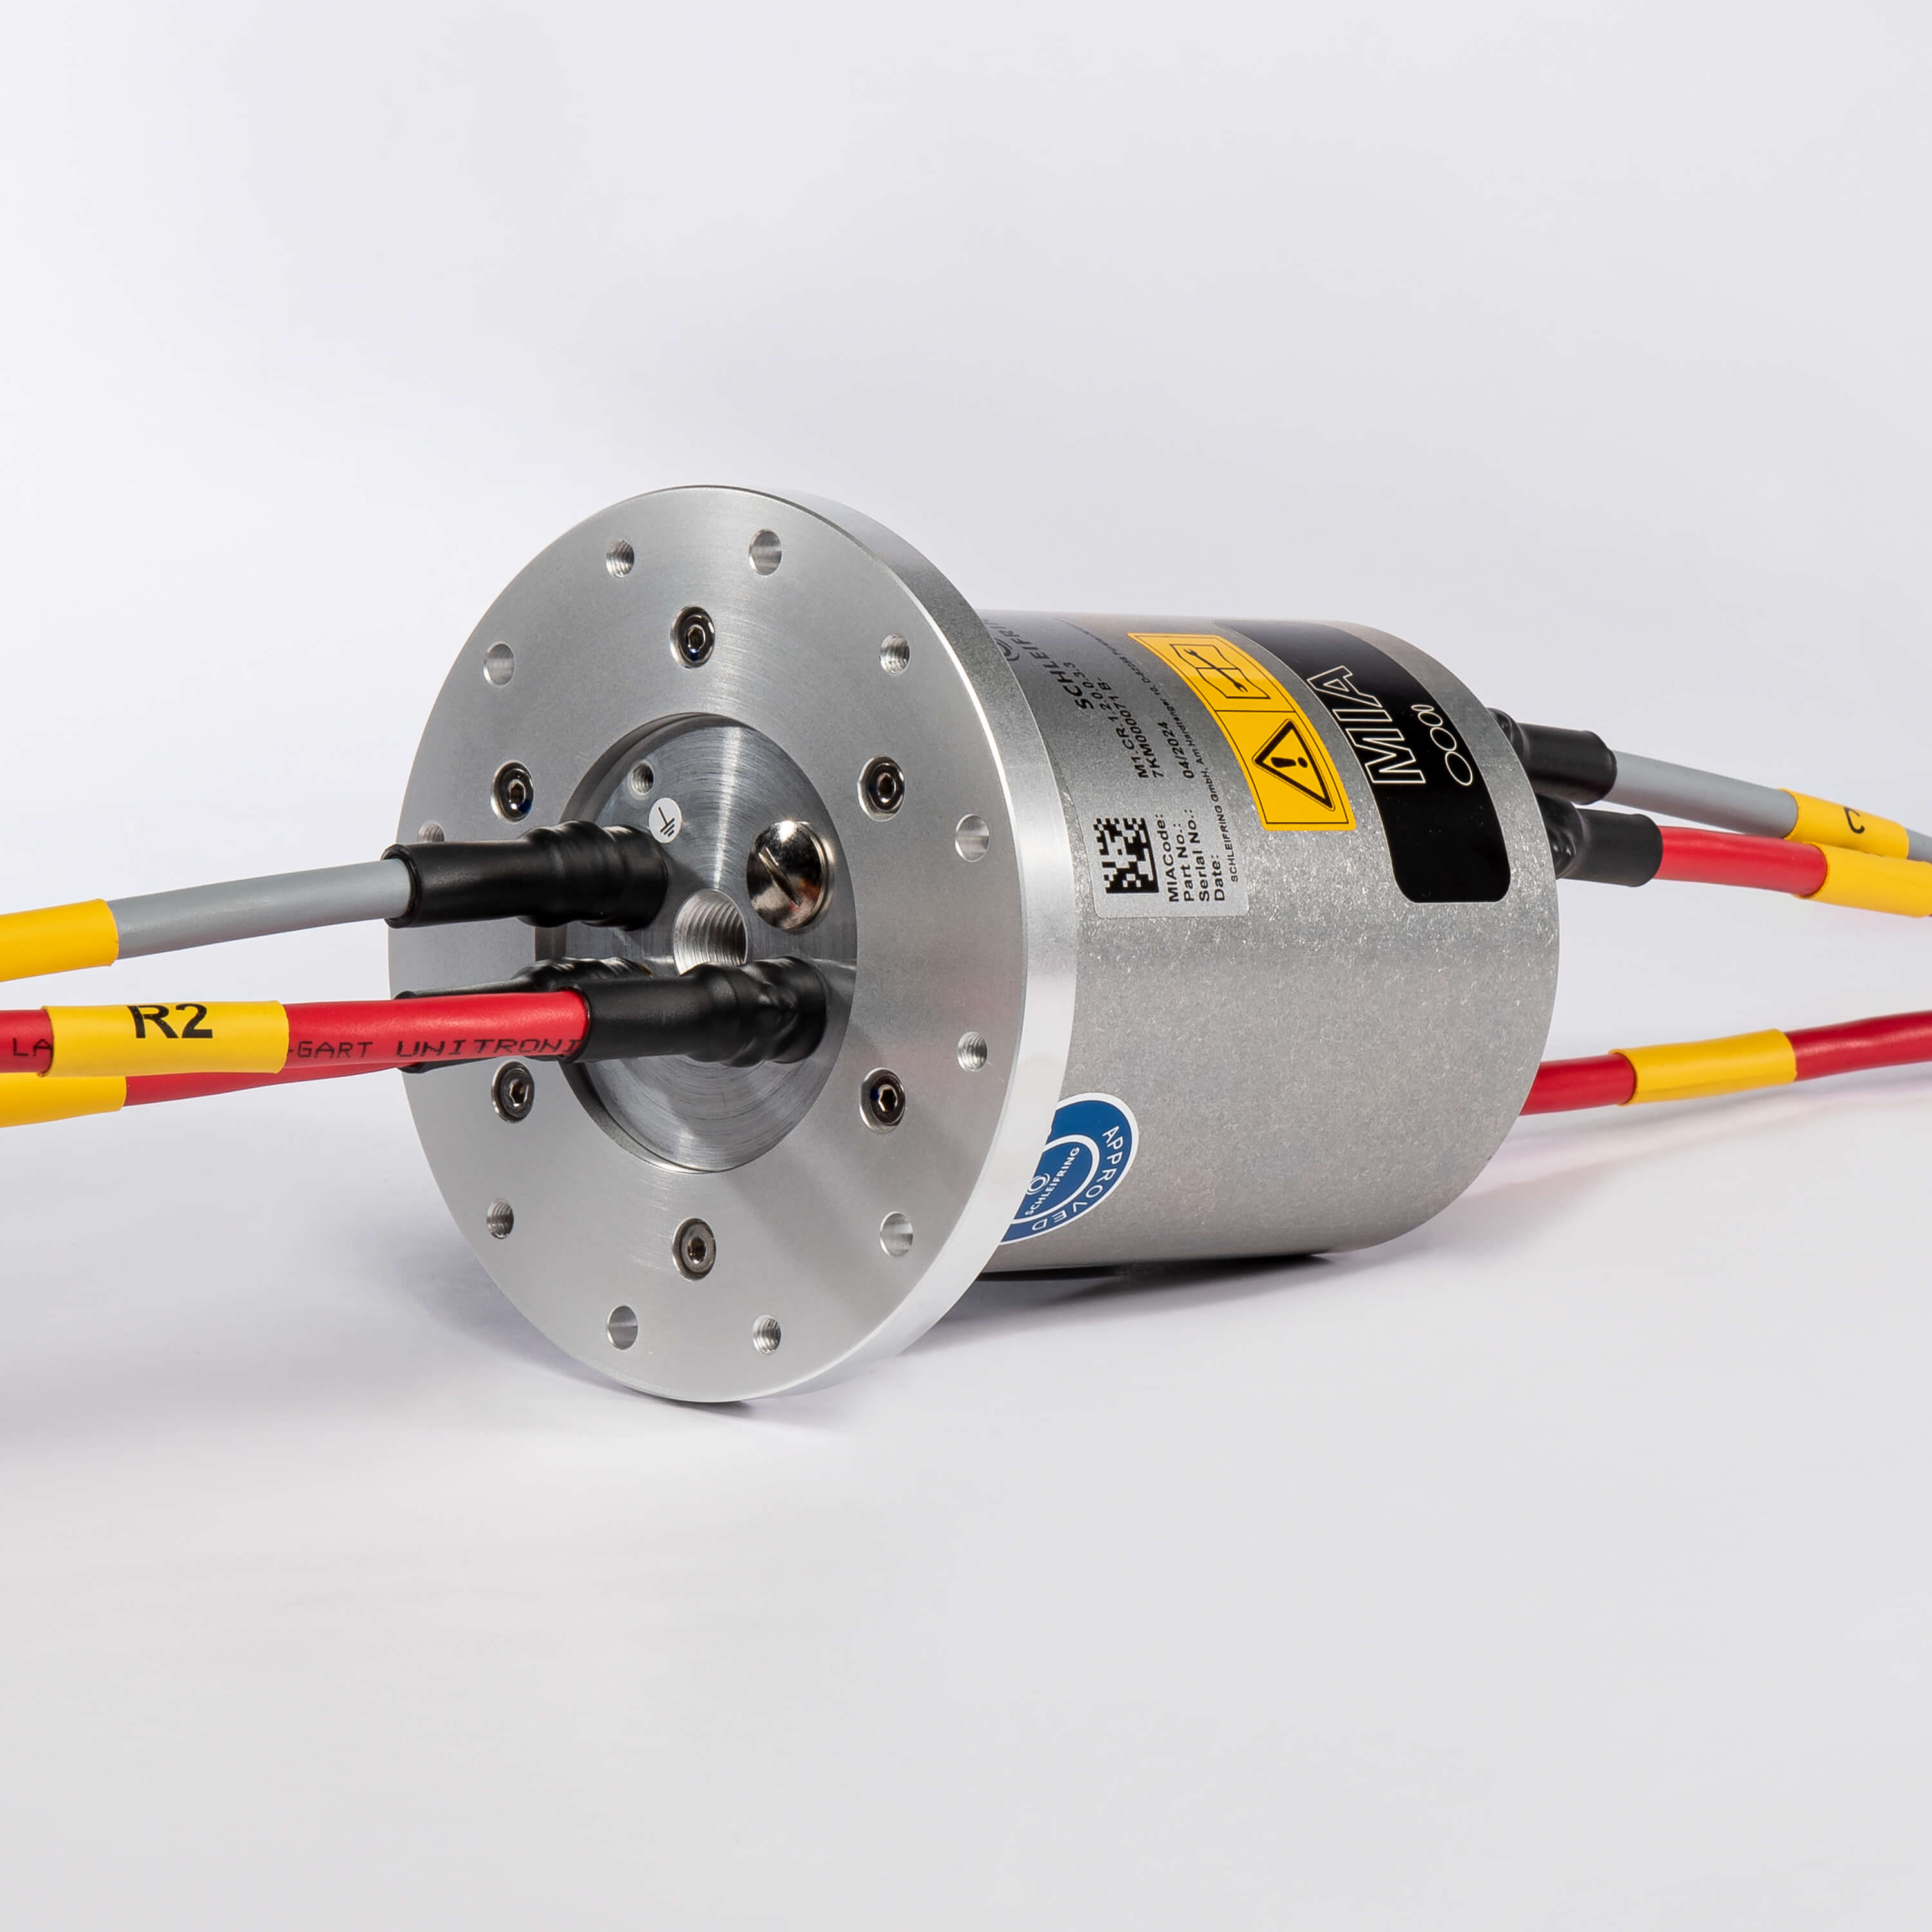 Power slip ring (4-way) and CC-Link transfer  (config. Code: M1.CR.1.2.0.0.3.3)